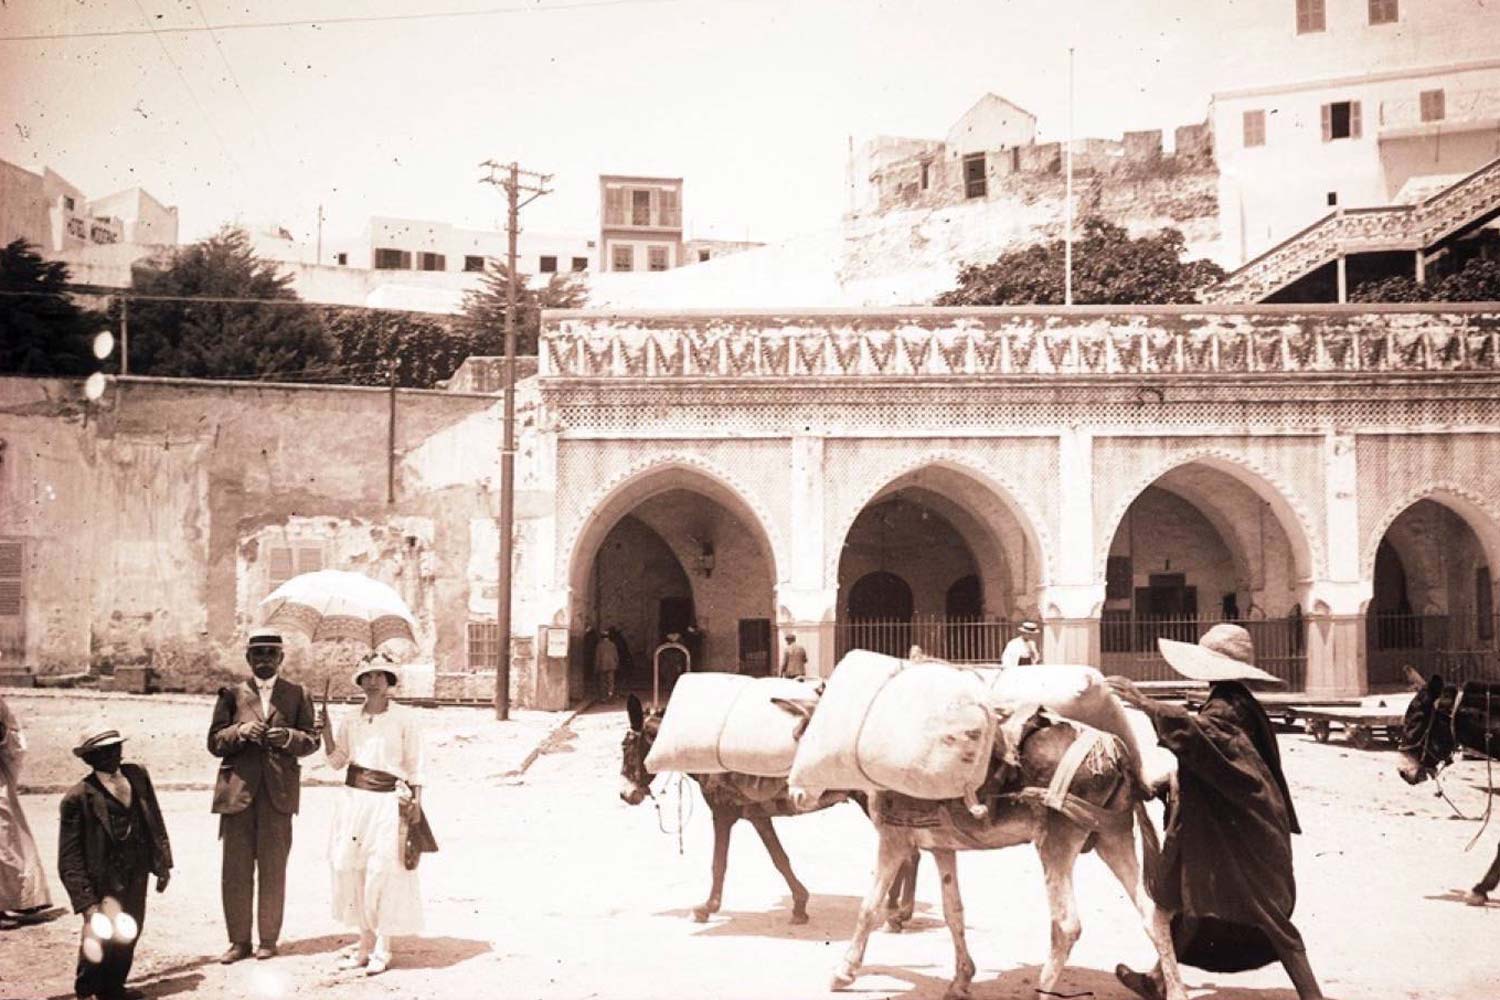 International Tangier: Morocco & the Mediterranean in the early 20th c.